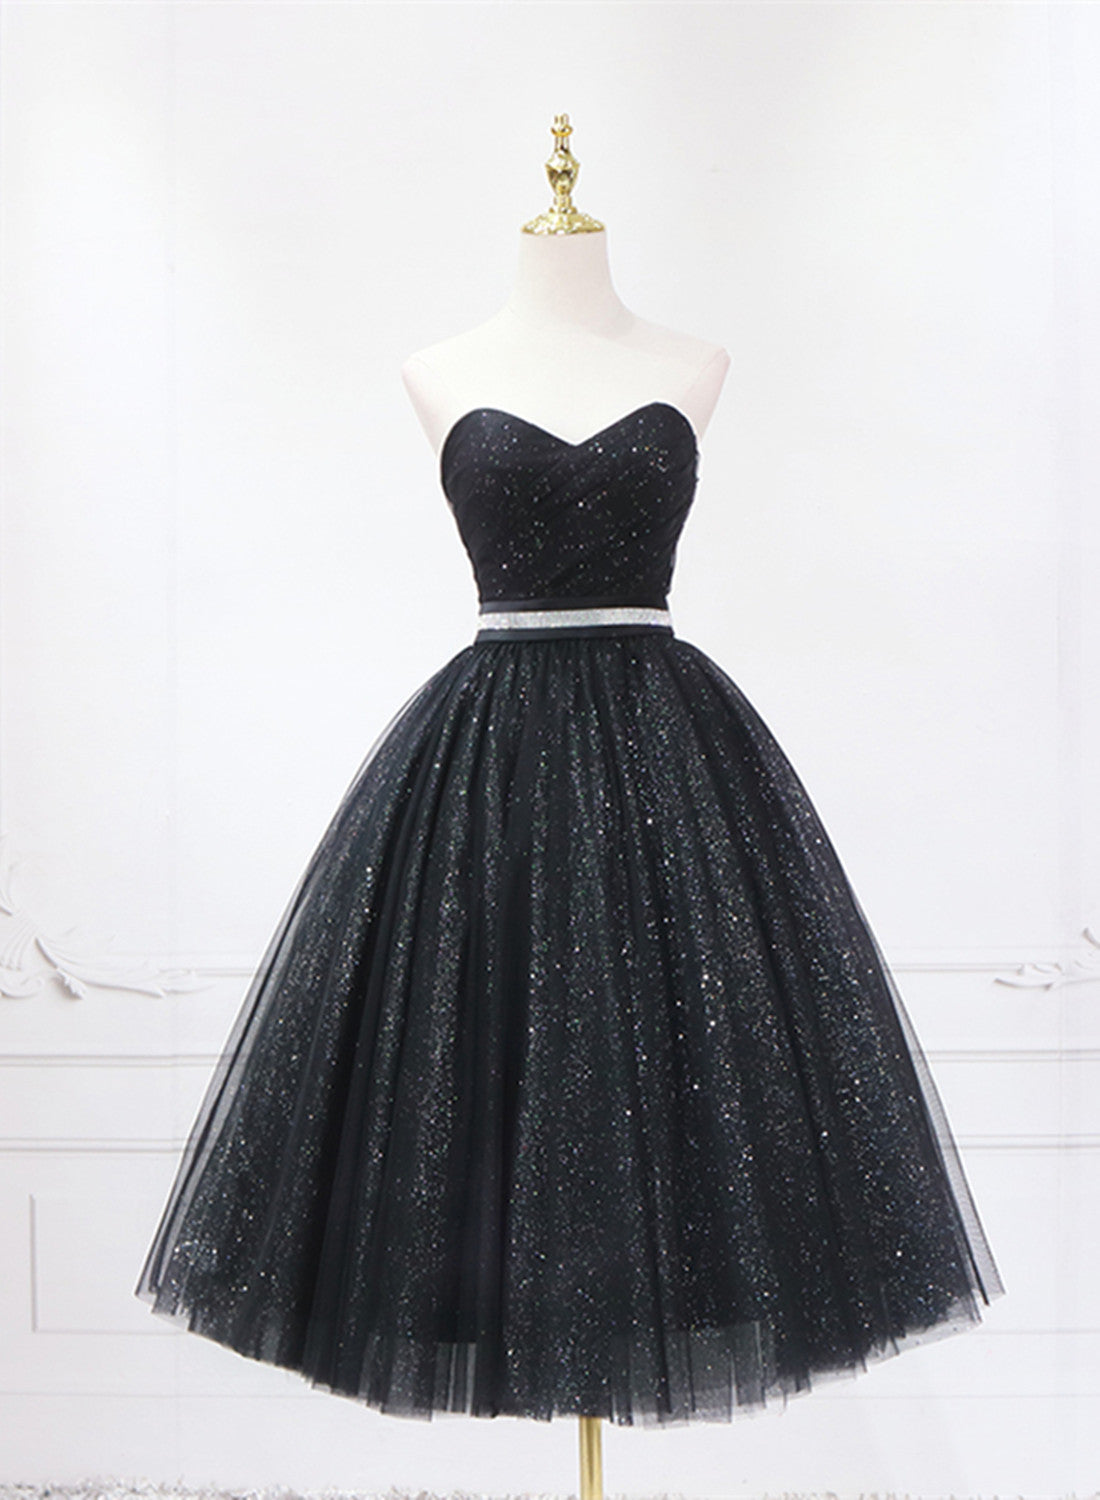 Shiny Black Sweetheart Tea Length Tulle Prom Dress Outfits For Girls, Black Evening Dress Outfits For Women Homecoming Dress